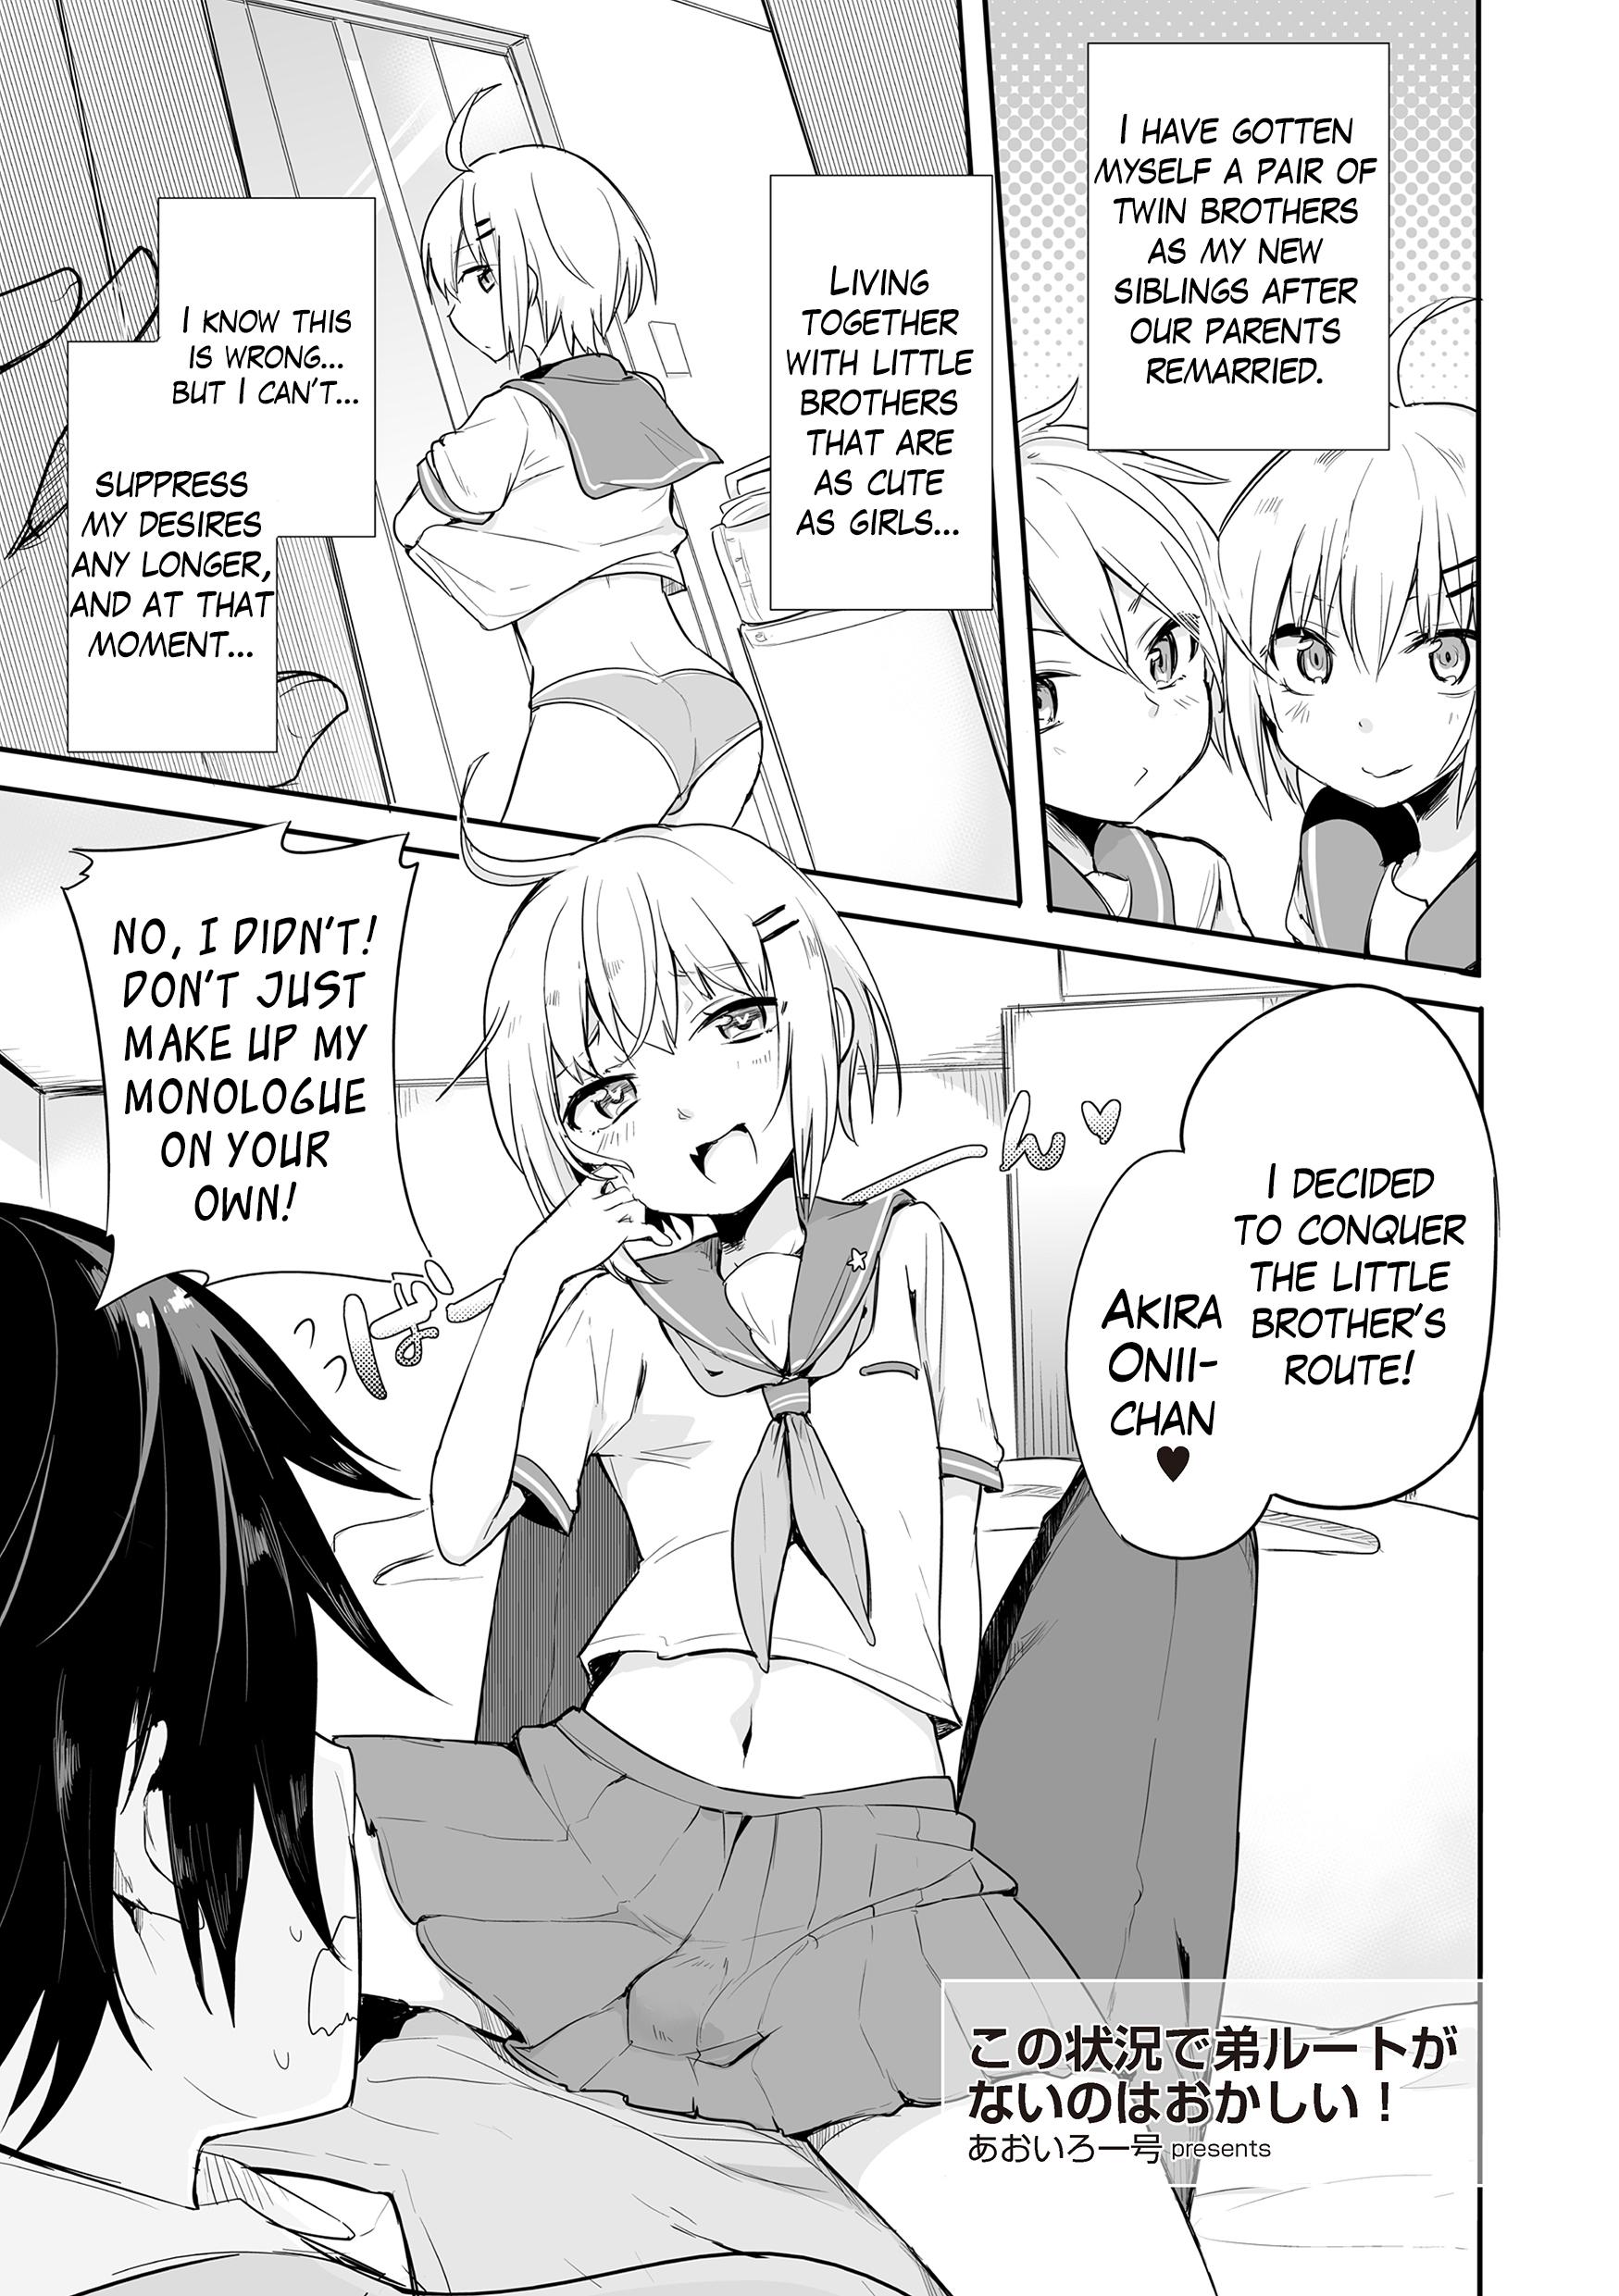 Black Kono Joukyou de Otouto Route ga nai no wa Okashii! | This Situation is too Weird for it not to be a Little Brother’s Route! Jockstrap - Page 2